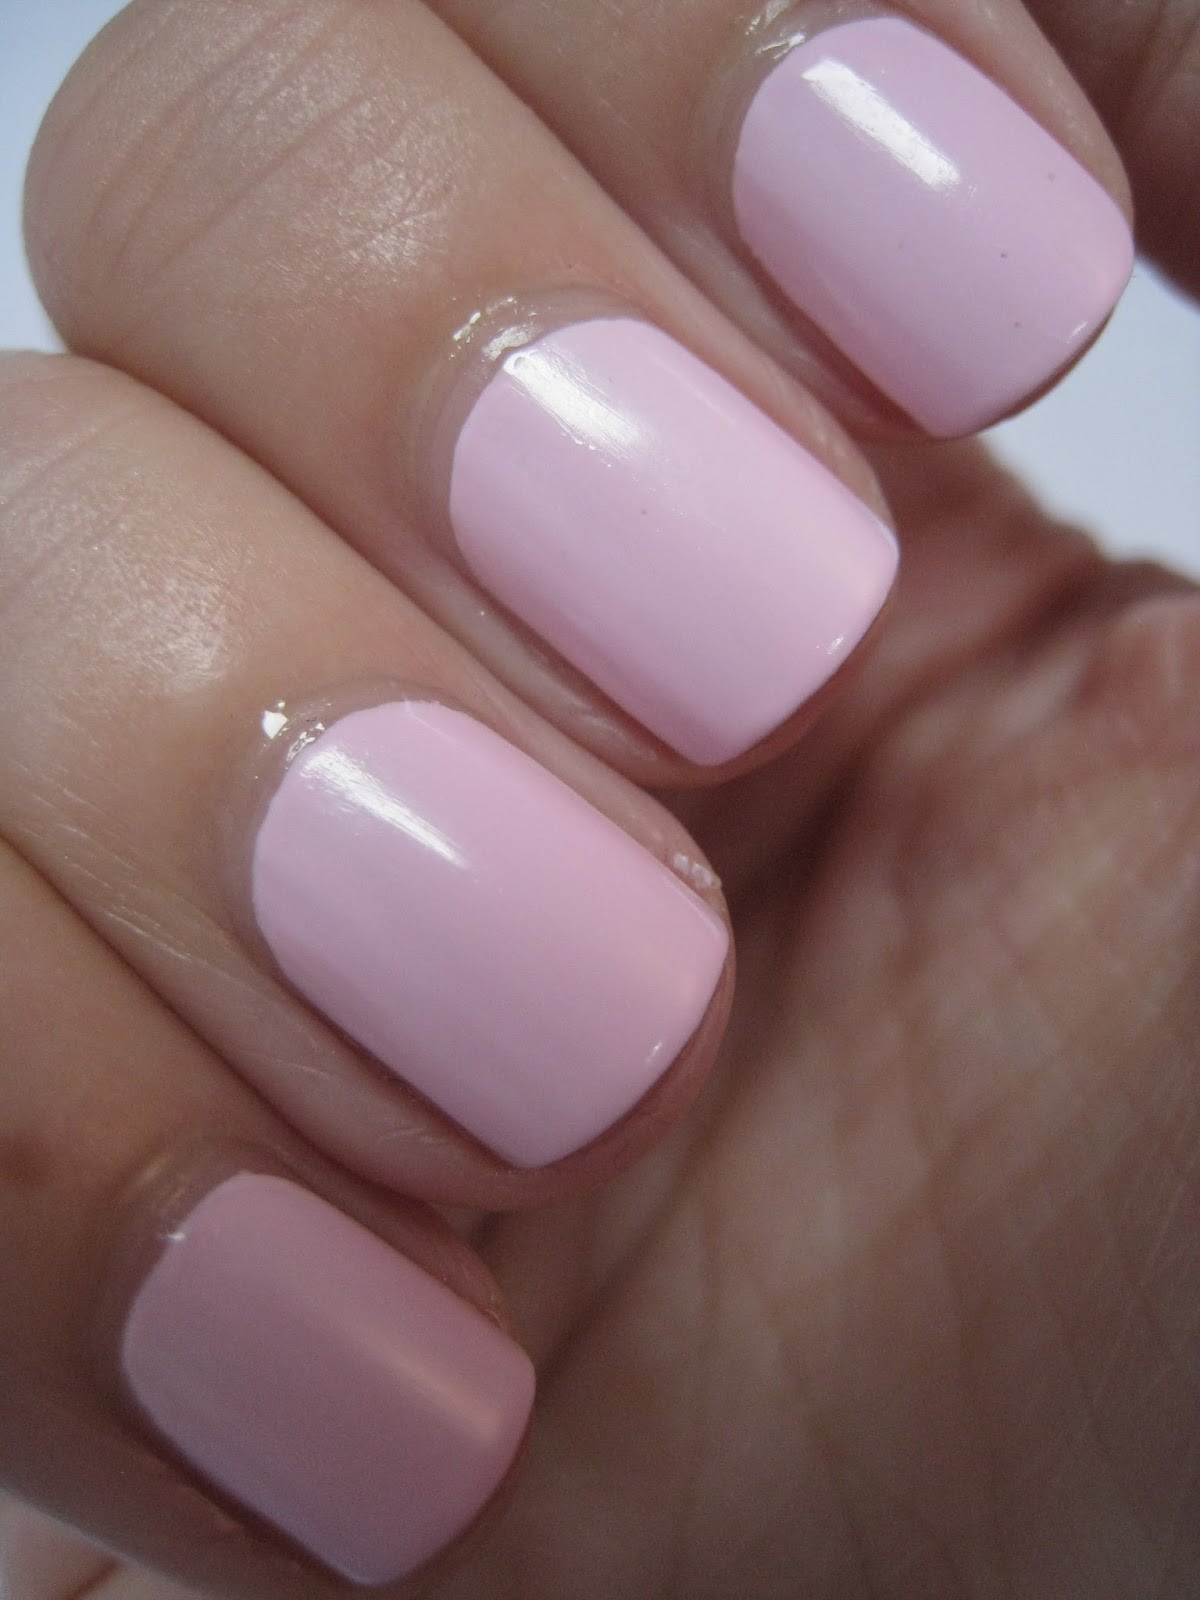 Opi Pink Nail Colors
 Naily perfect OPI Mod About You Swatch